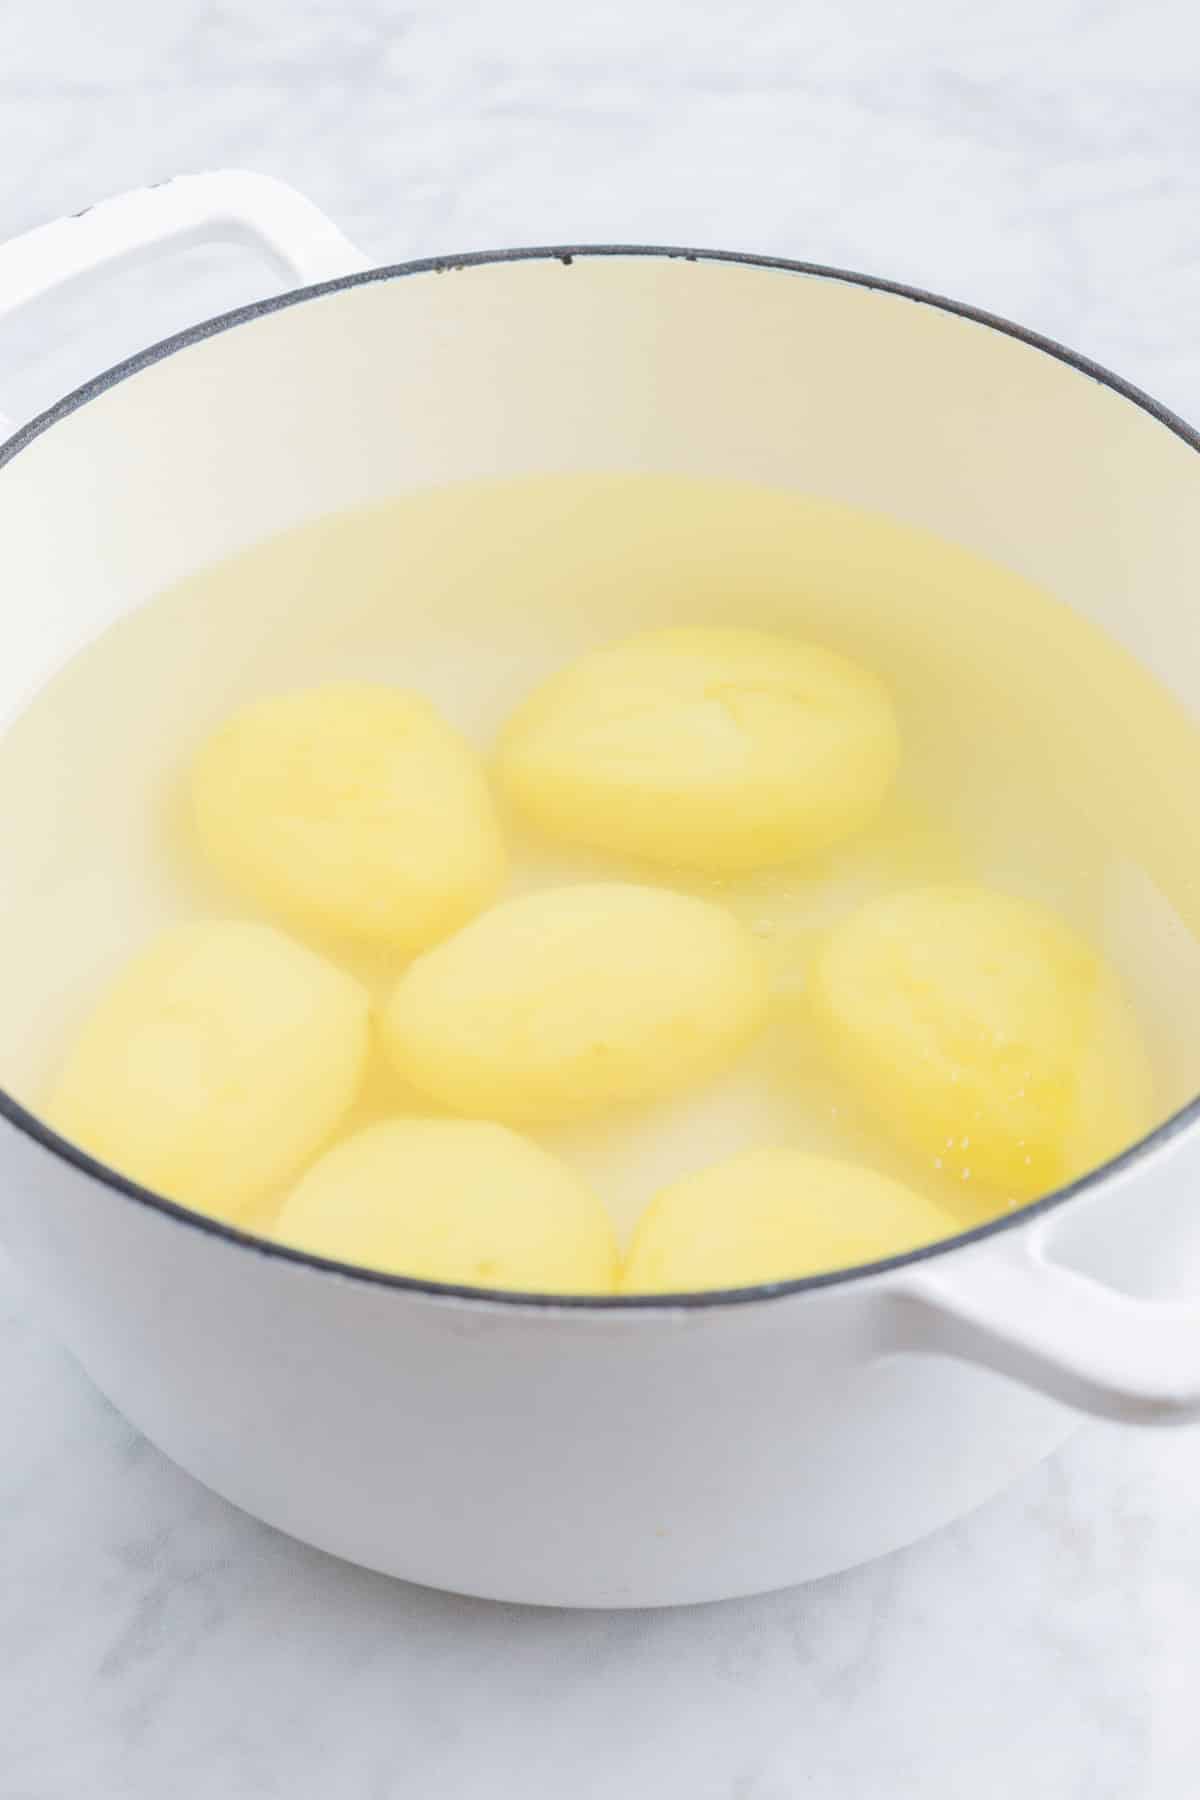 Potatoes are boiled until tender.